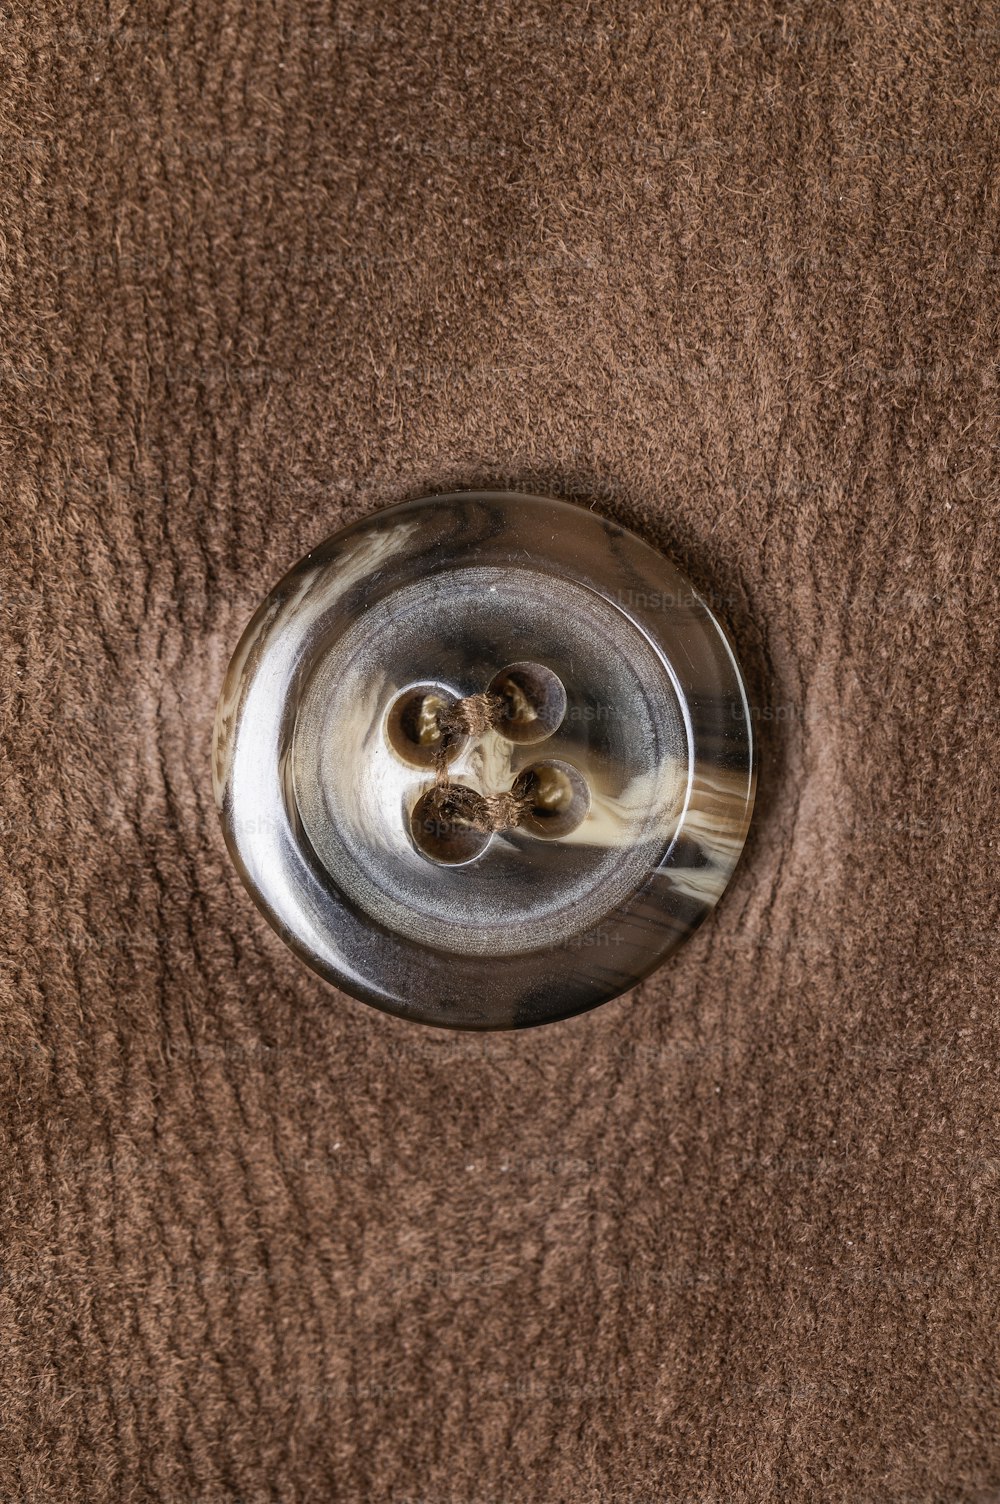 a close up of a metal object on a brown surface